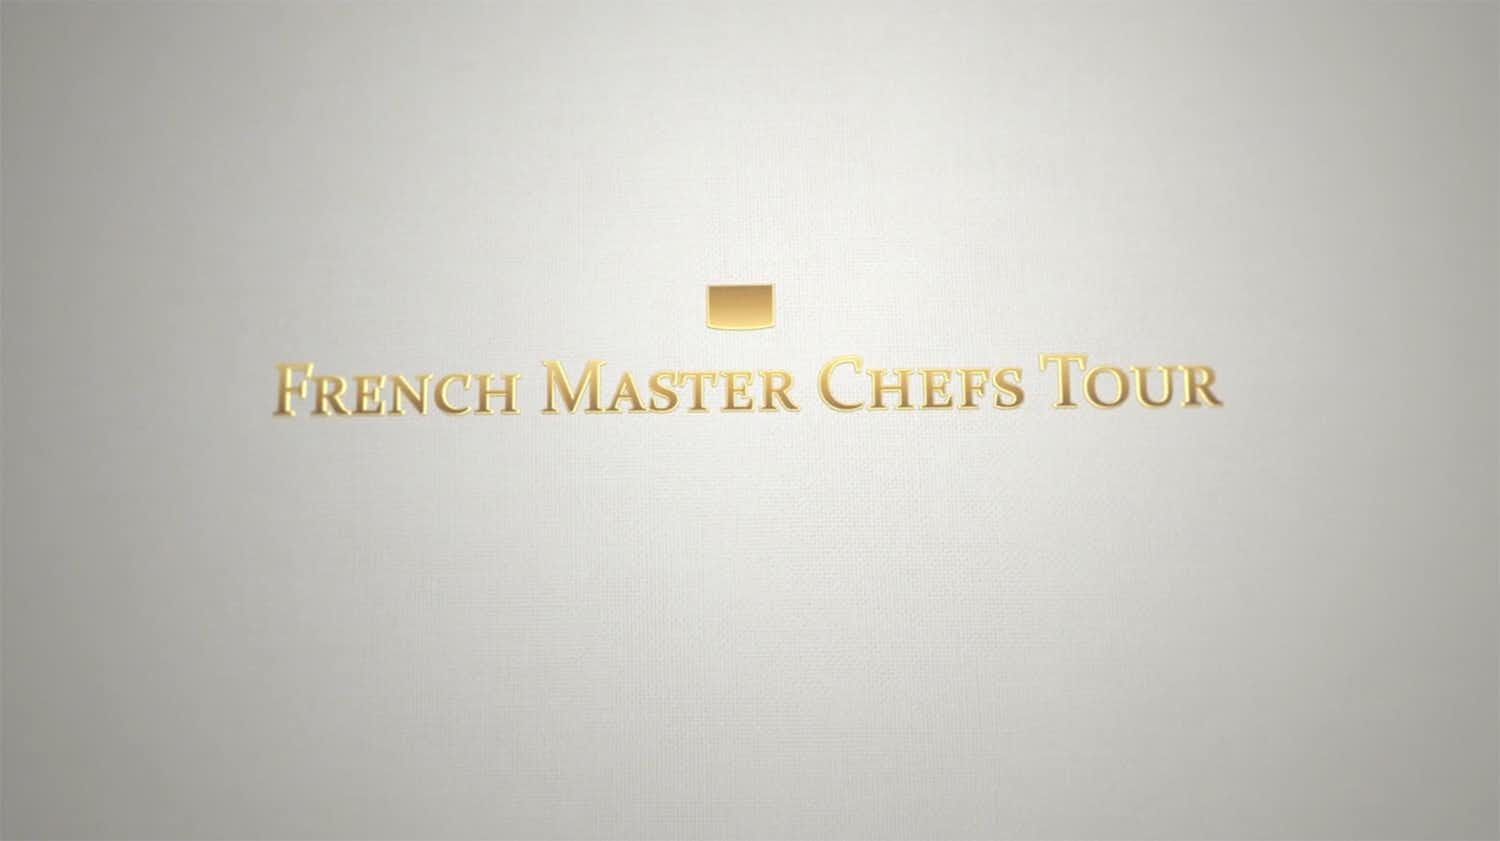 Développeur Front-end • French master chefs tour